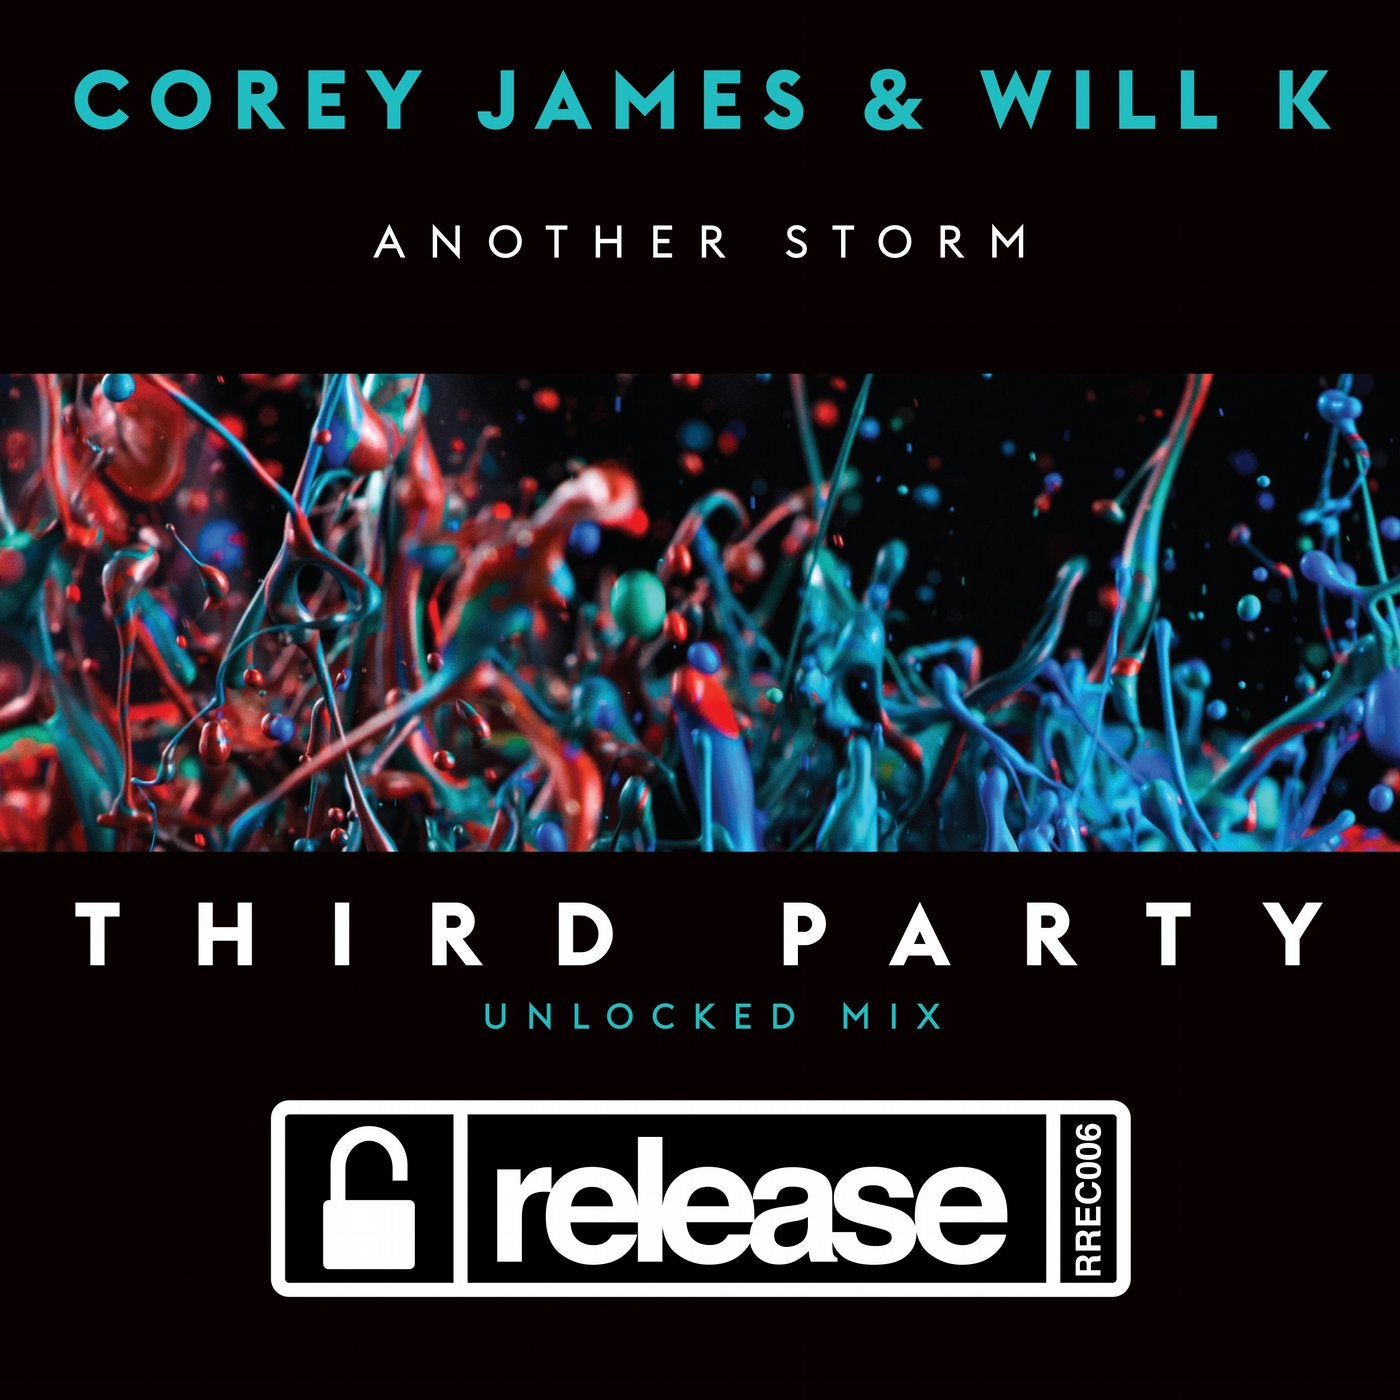 Another Storm - Third Party Unlocked Mix